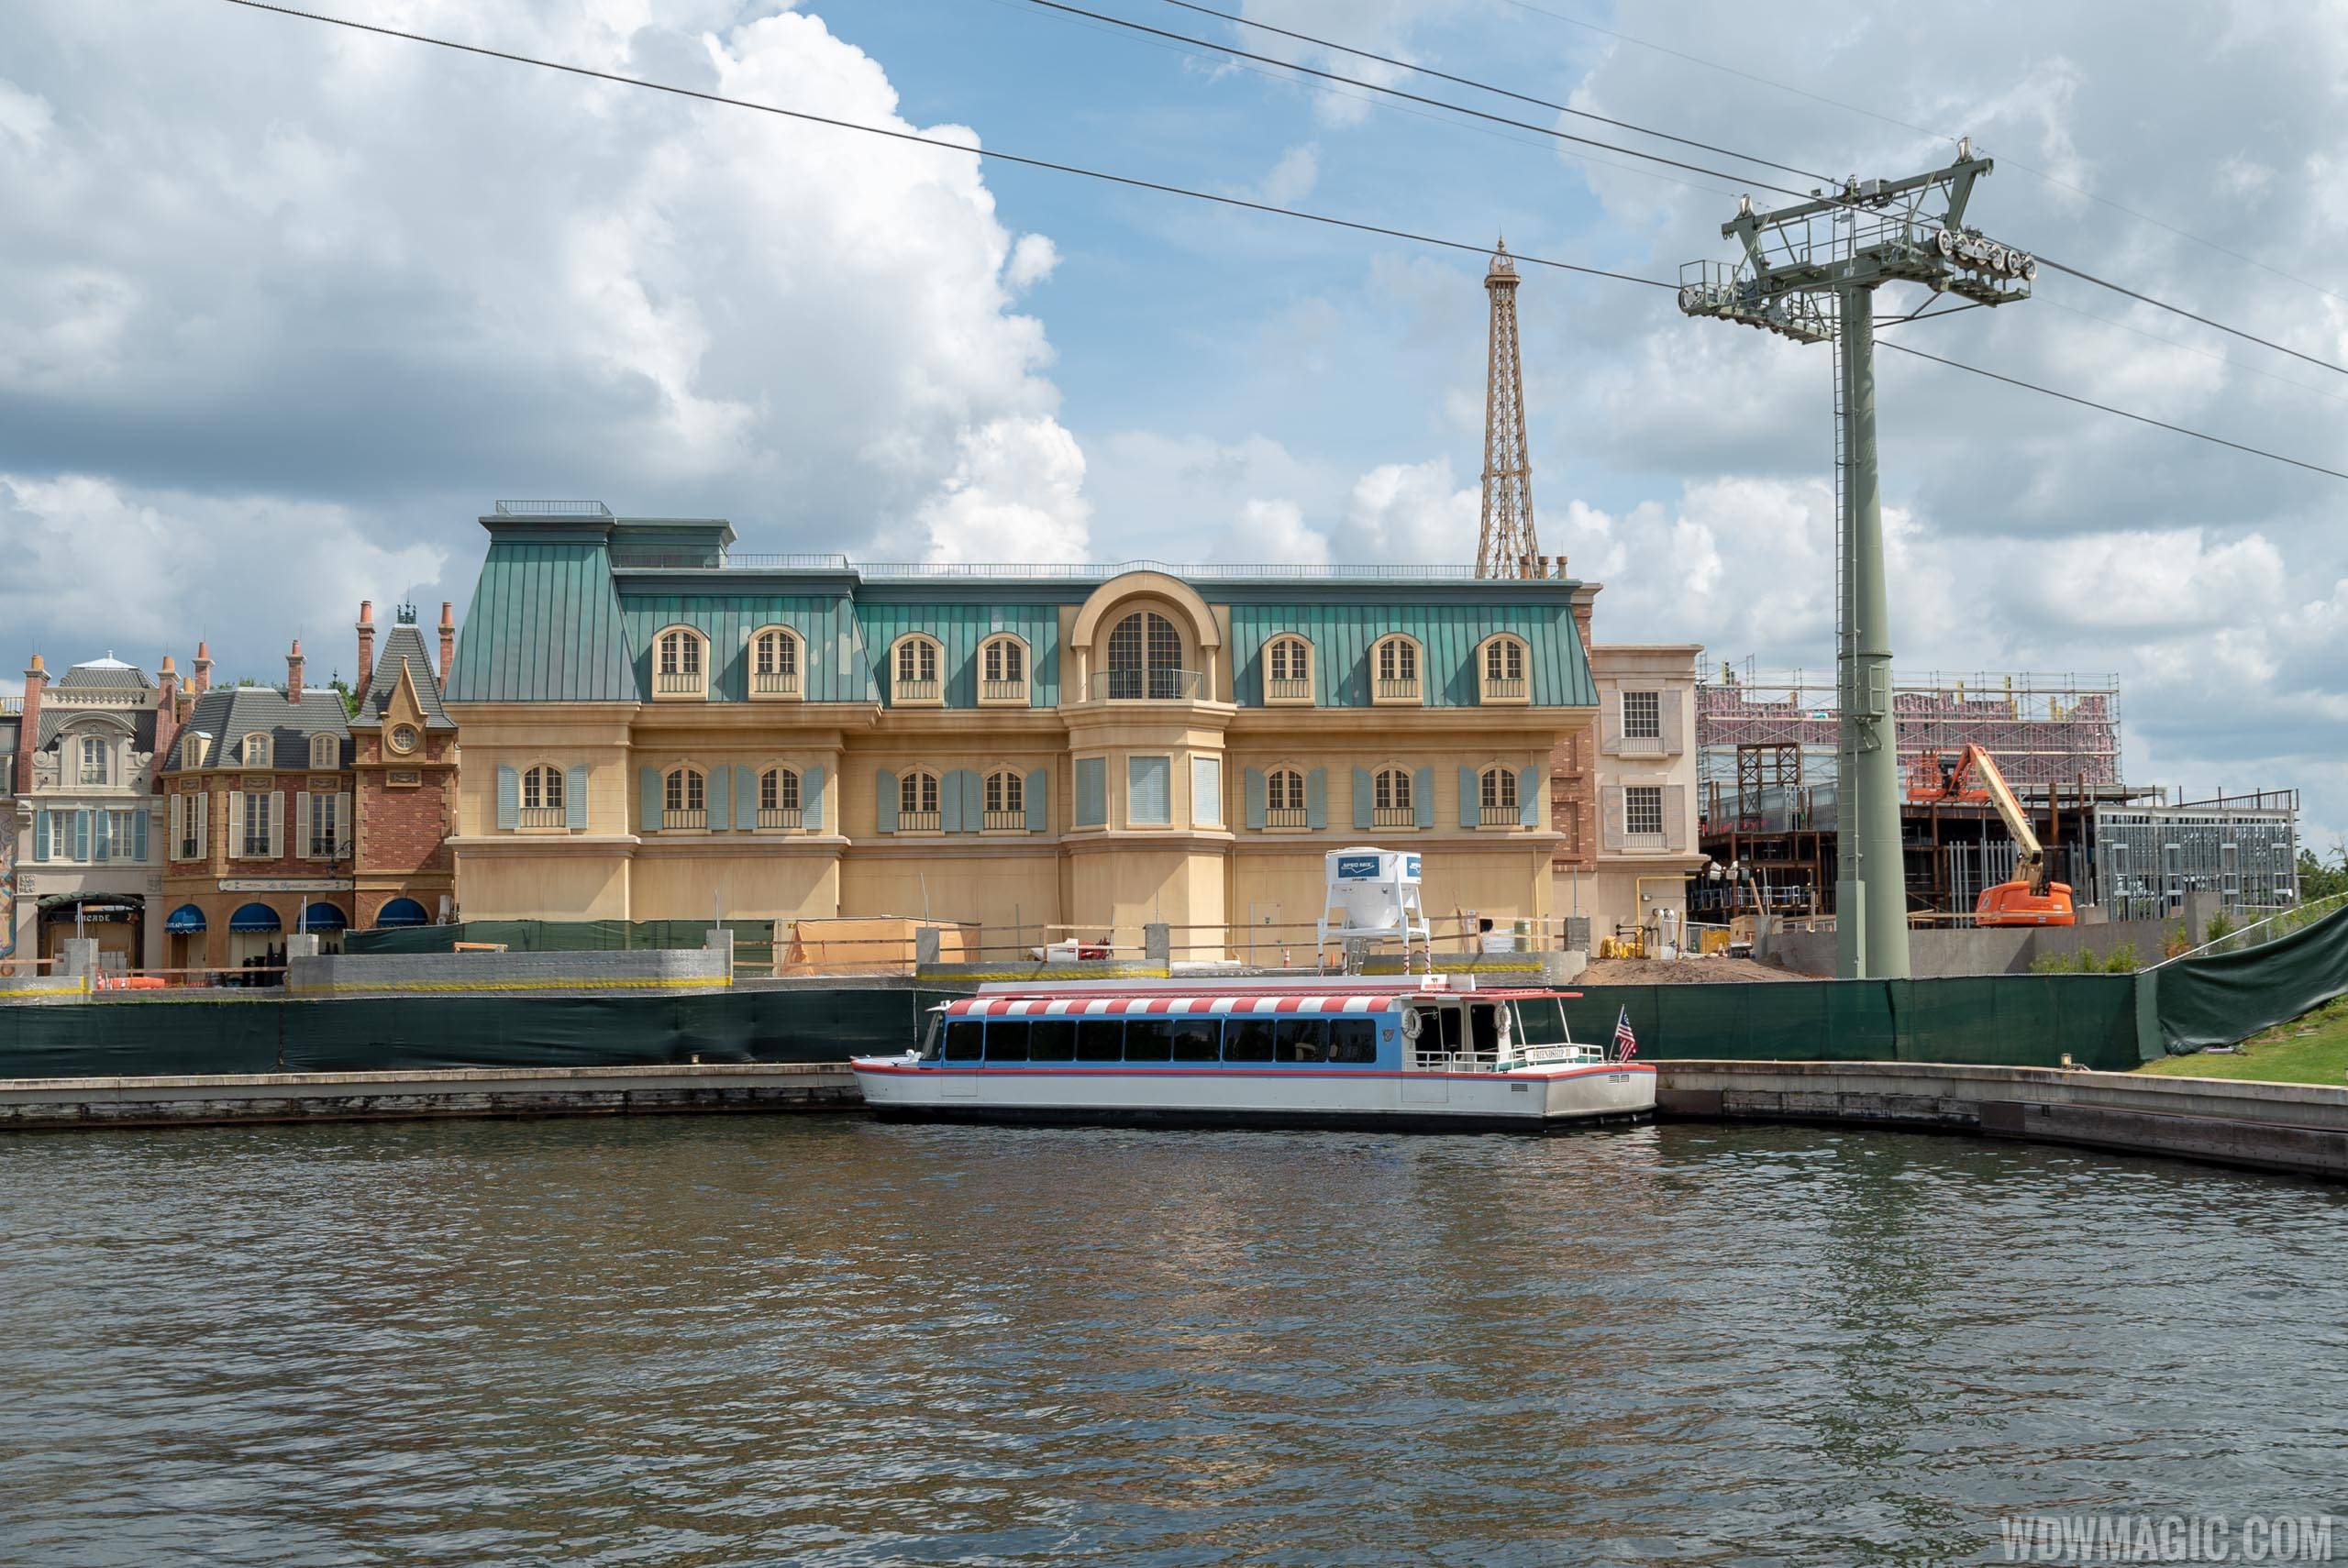 Remy's Ratatouille Adventure construction viewed from International Gateway - April 2019